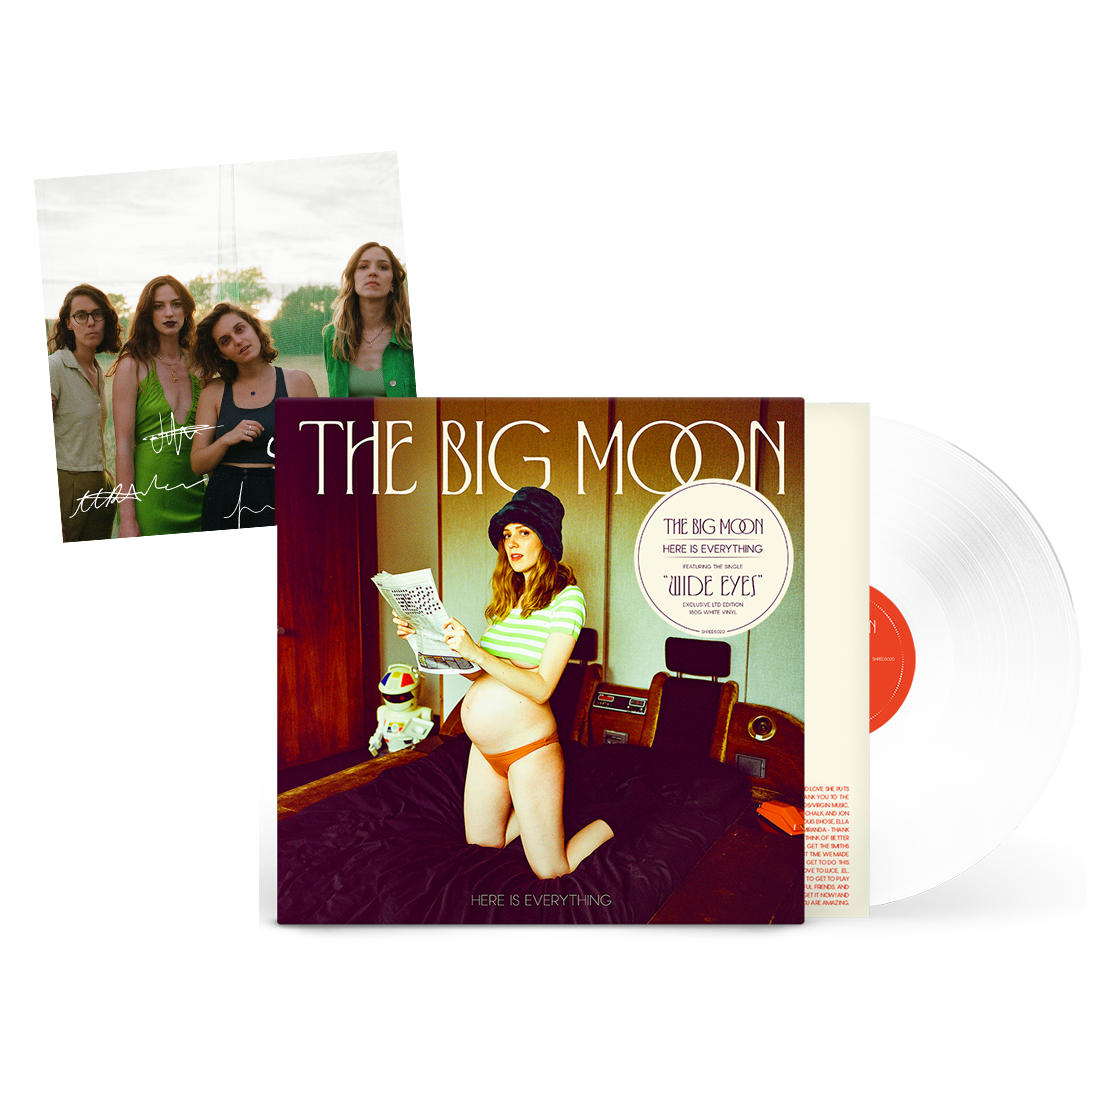 Here Is Everything: Limited White Gatefold Vinyl LP + Exclusive Signed Print